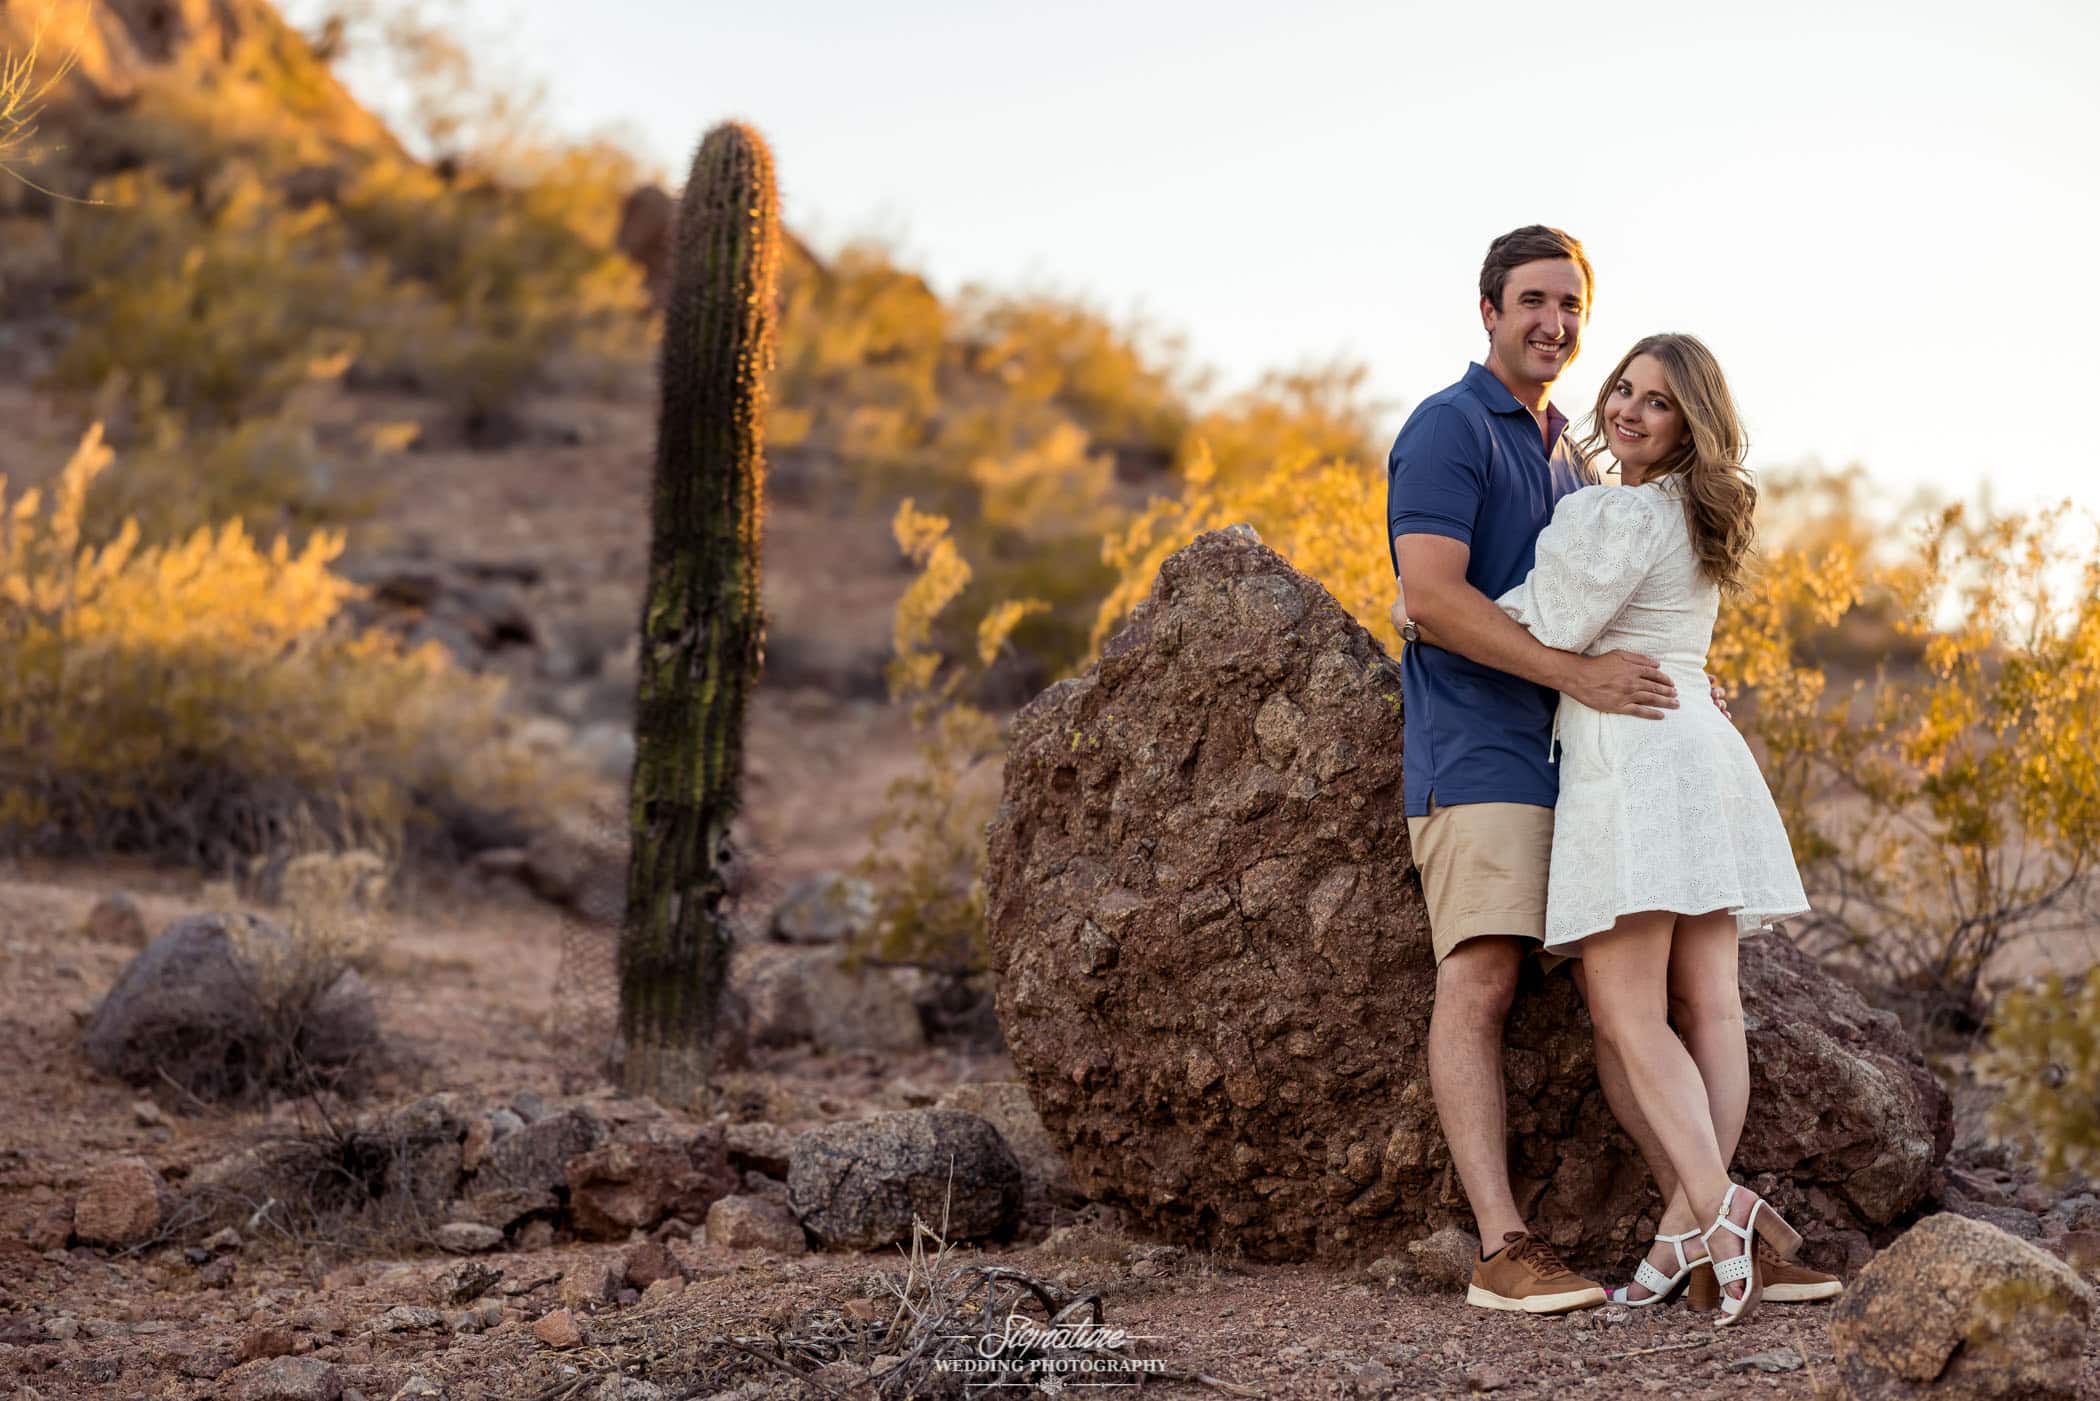 Couple hugging next to cactus